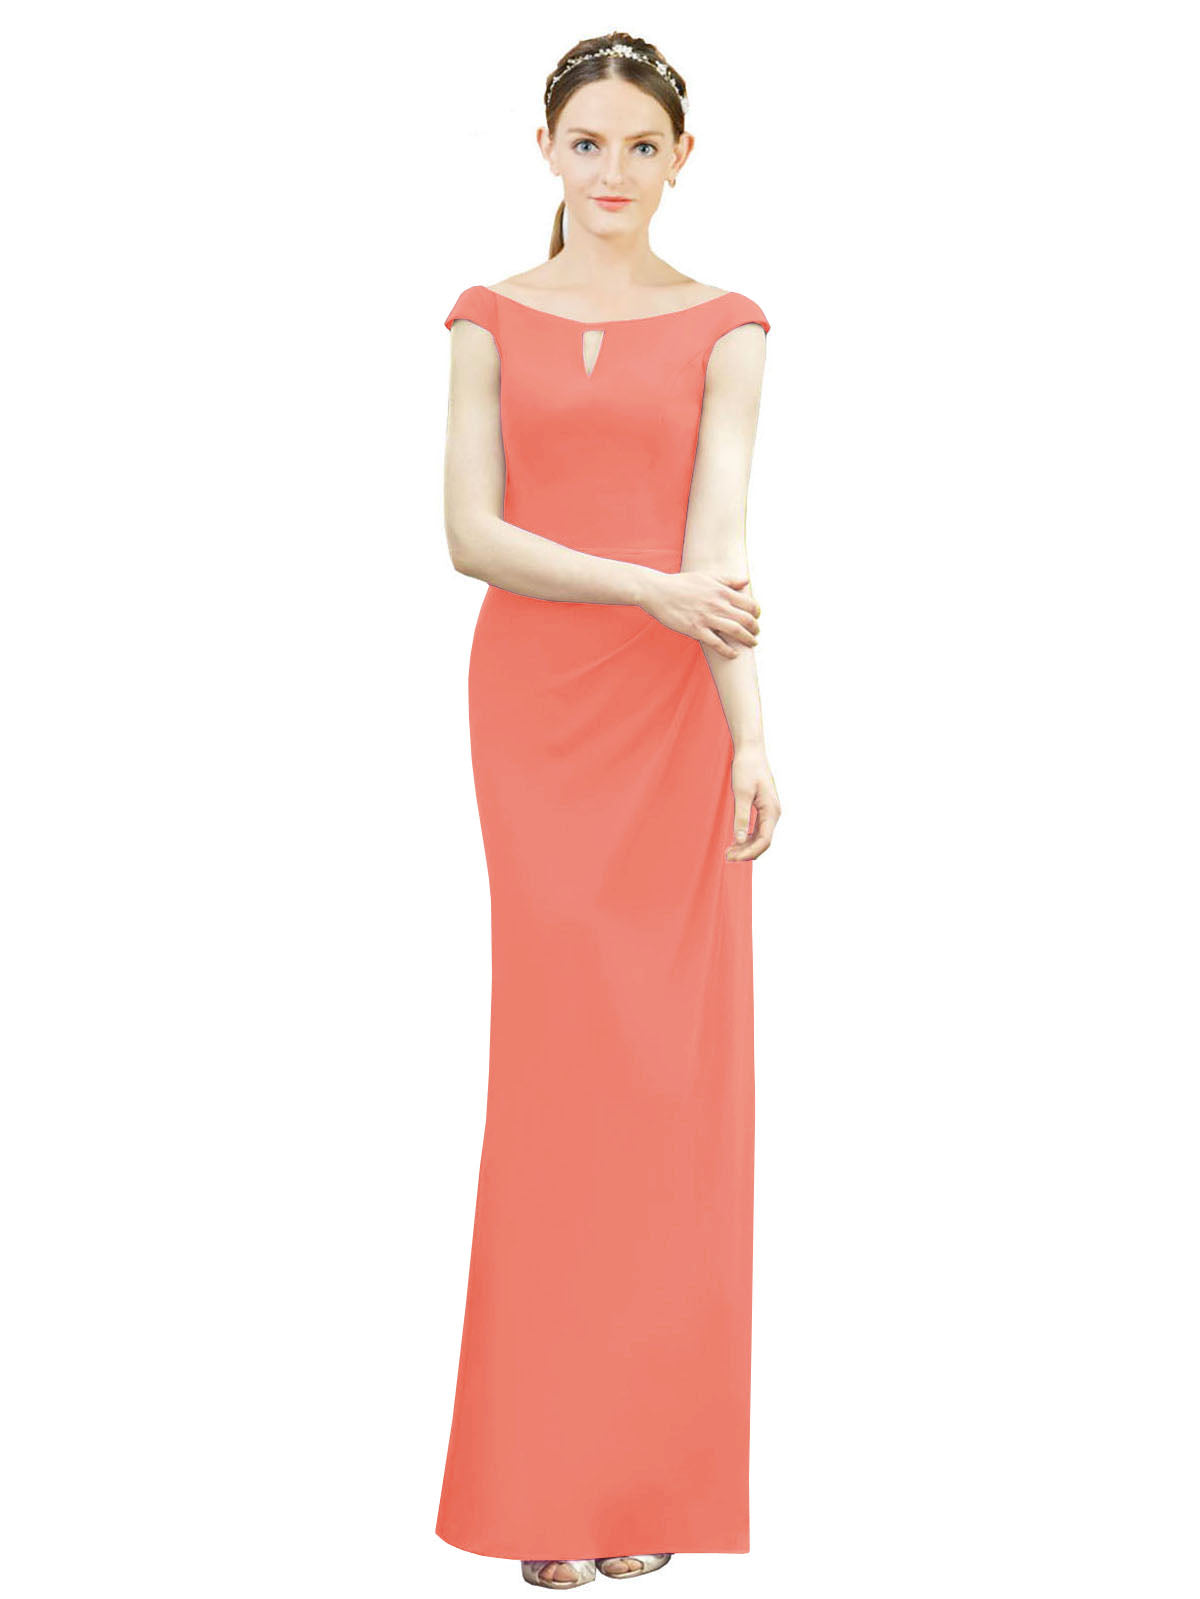 Coral Mermaid, Fit and Flare Bateau, High Neck Sleeveless Long Bridesmaid Dress Emilee 